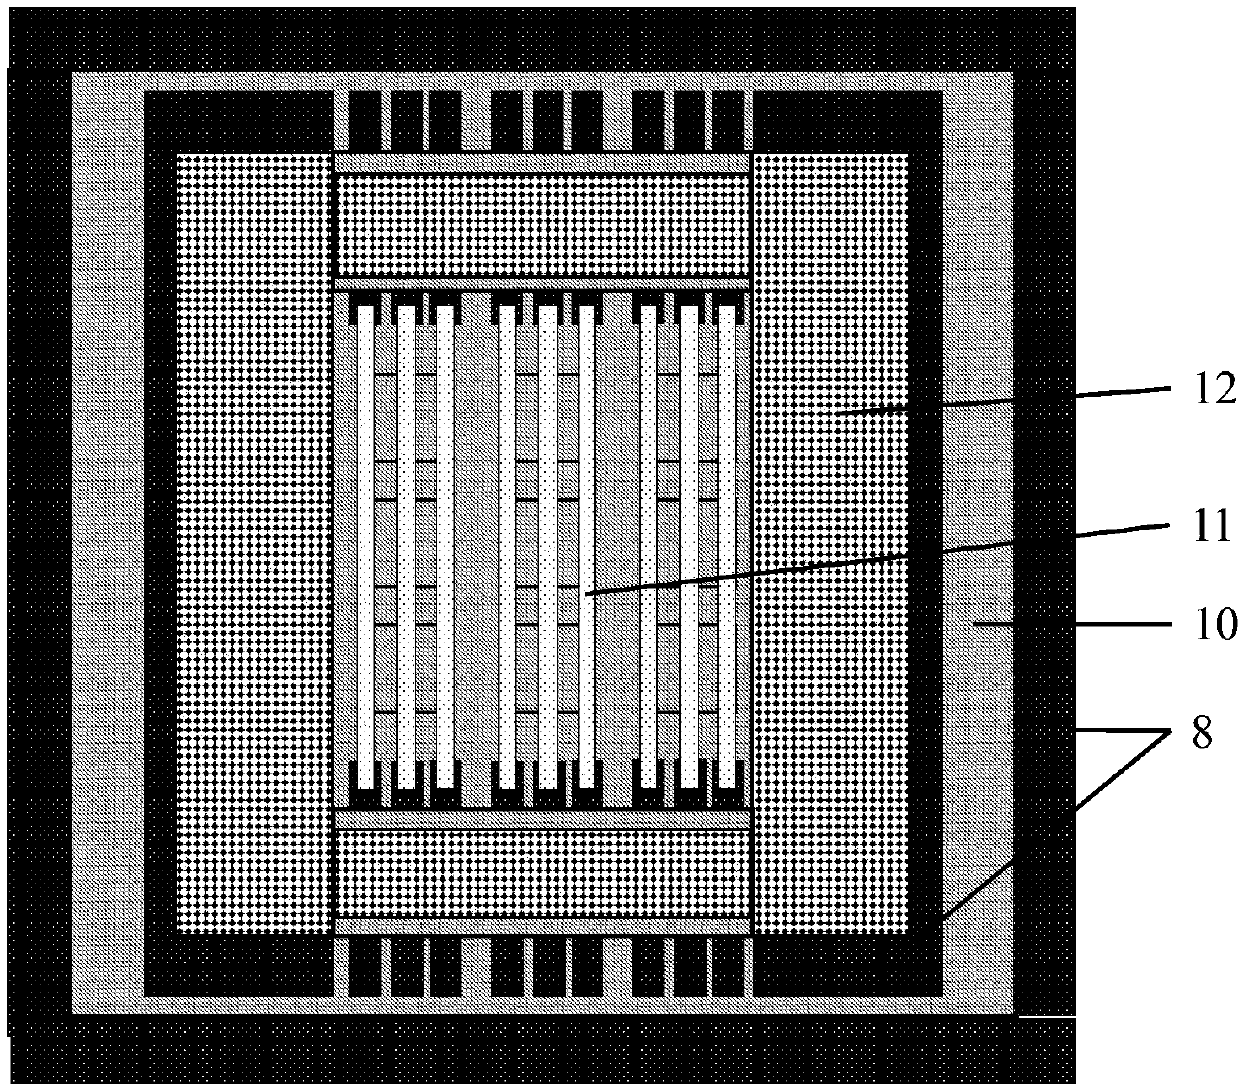 Optical beam scanning chips integrated on VCSEL coupled array and optical phase shifter array sheet